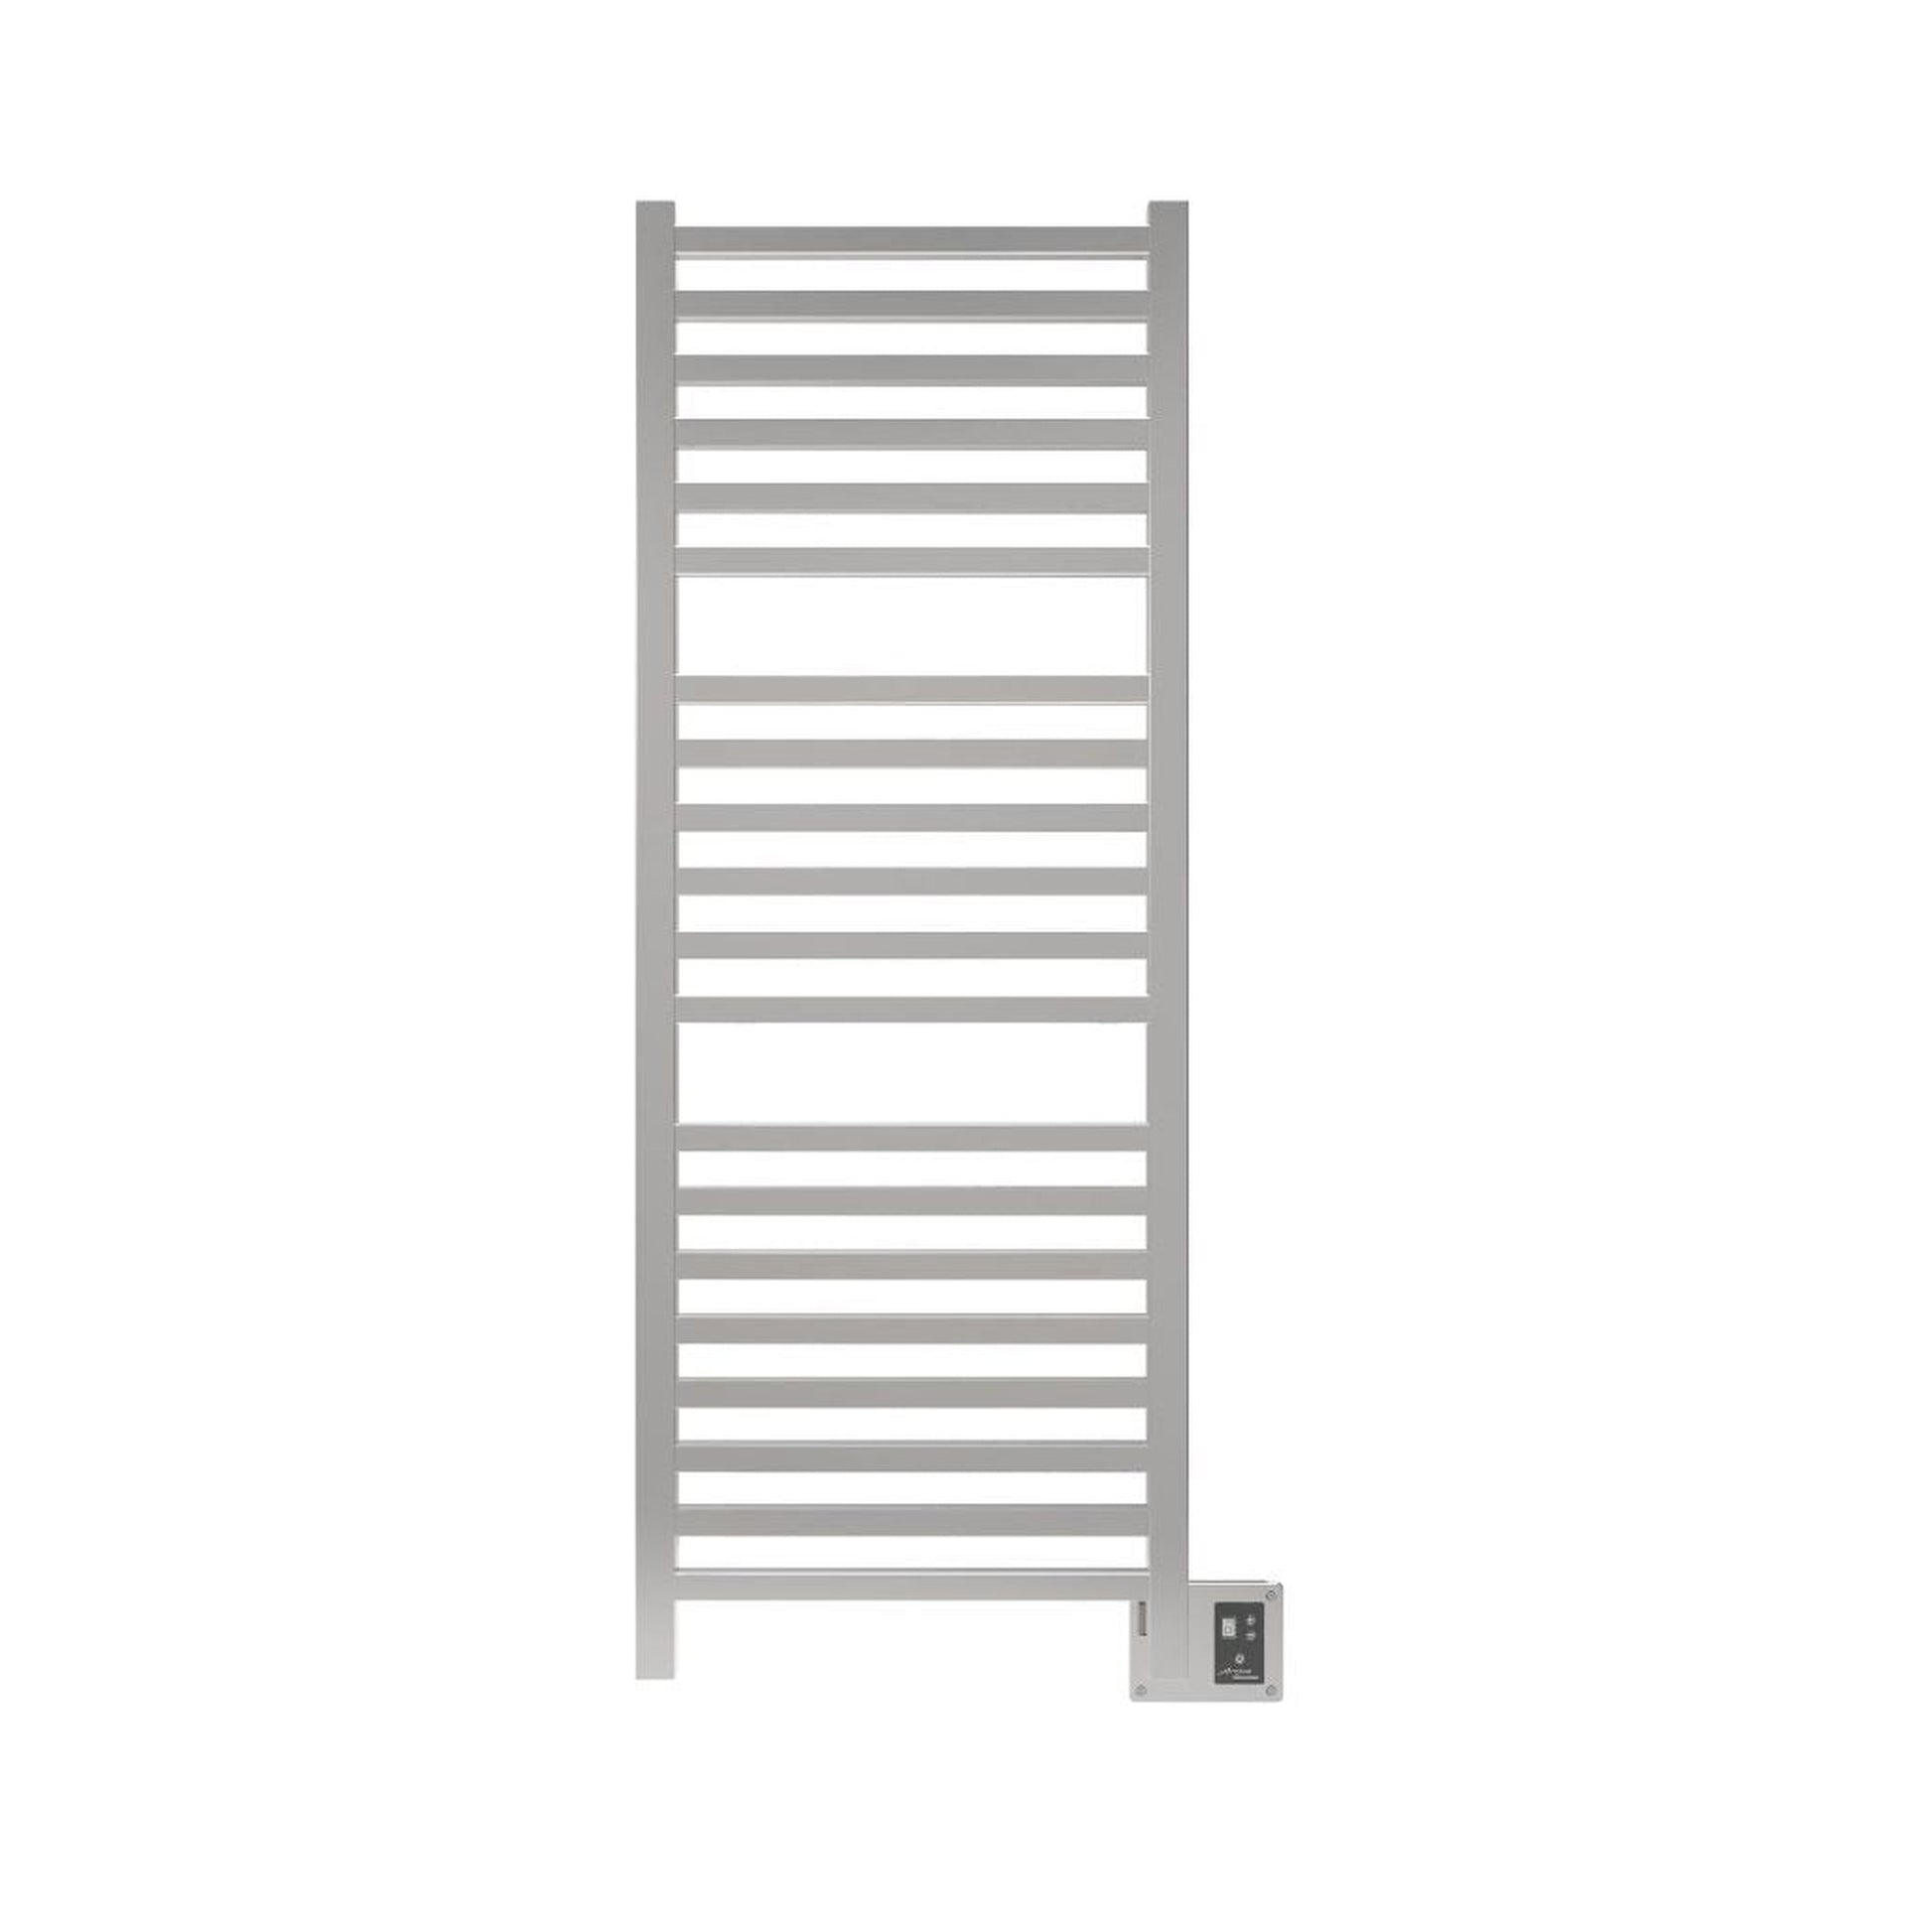 Amba Quadro 20" x 54" 20-Bar Polished Stainless Steel Hardwired Towel Warmer With Digital Heat Controller